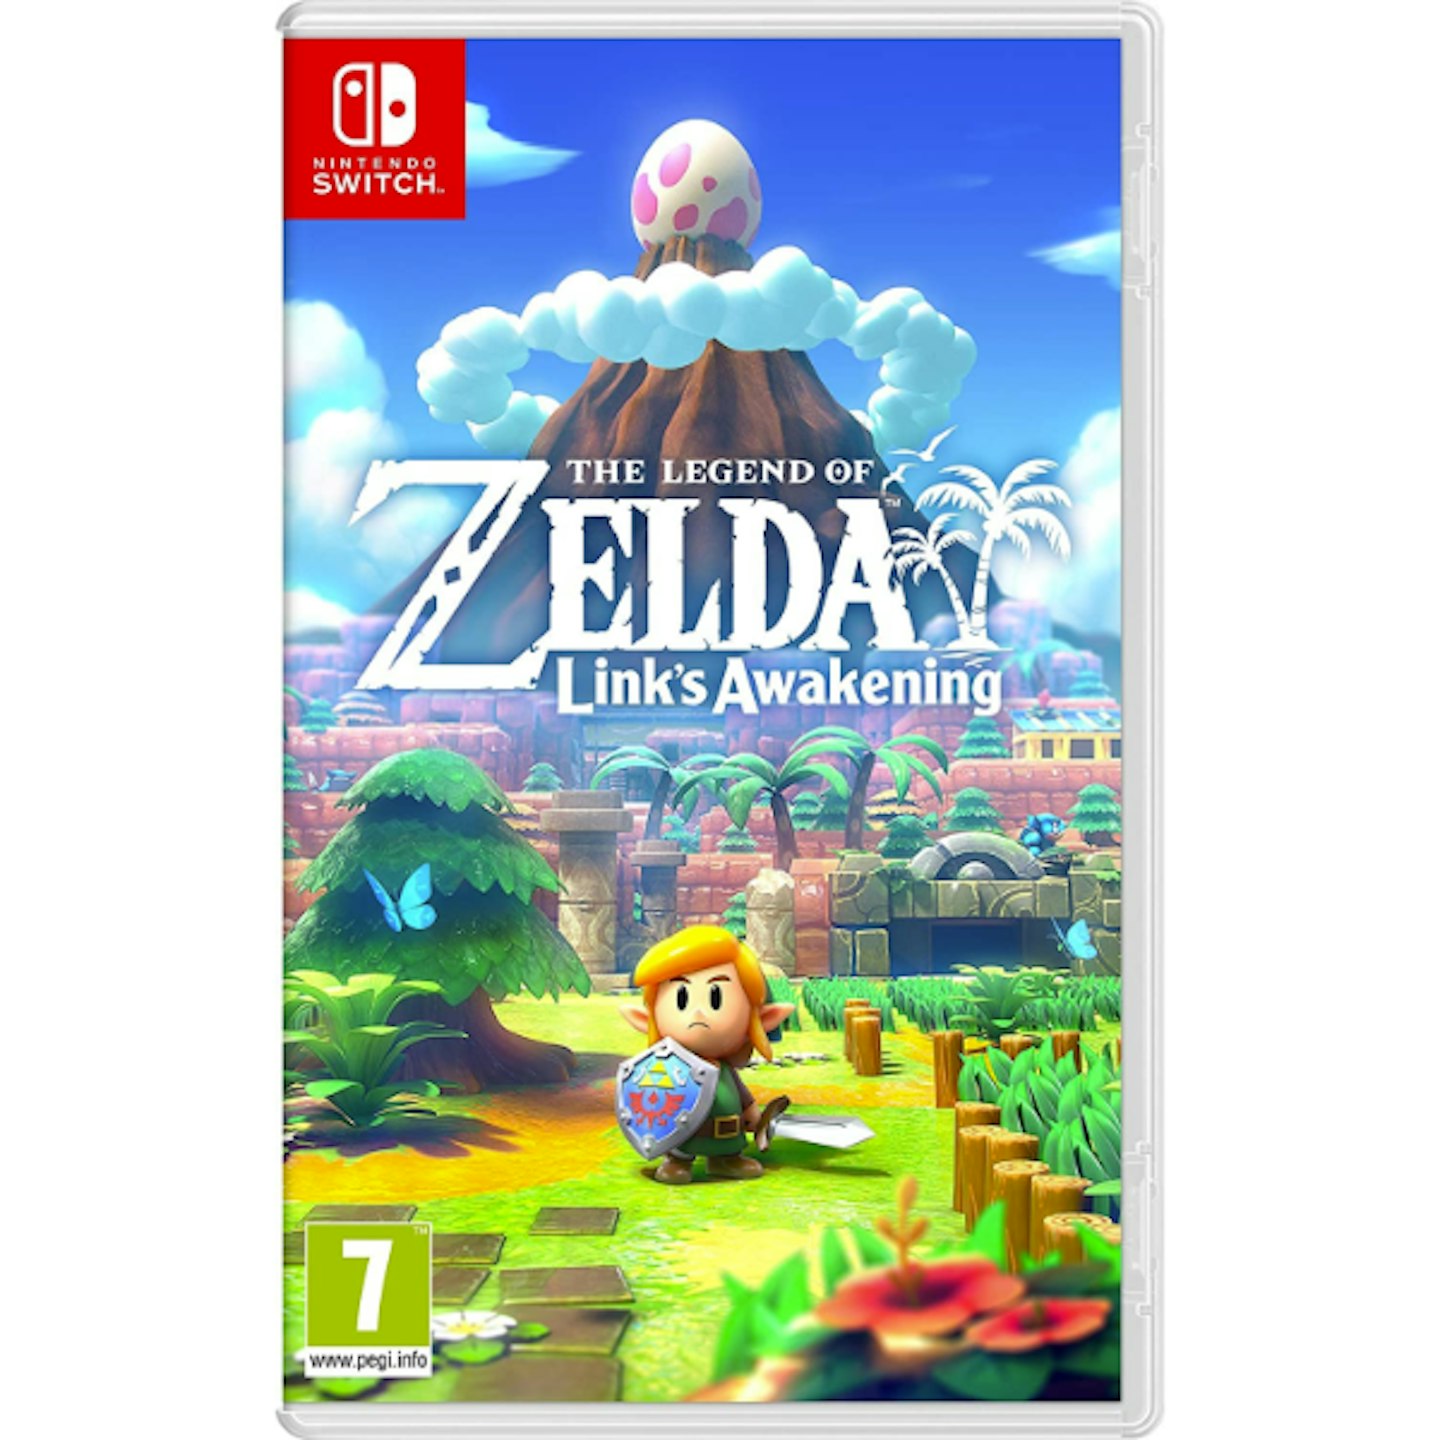 My Nintendo Switch game collection - 10 February 2022 : Matthew